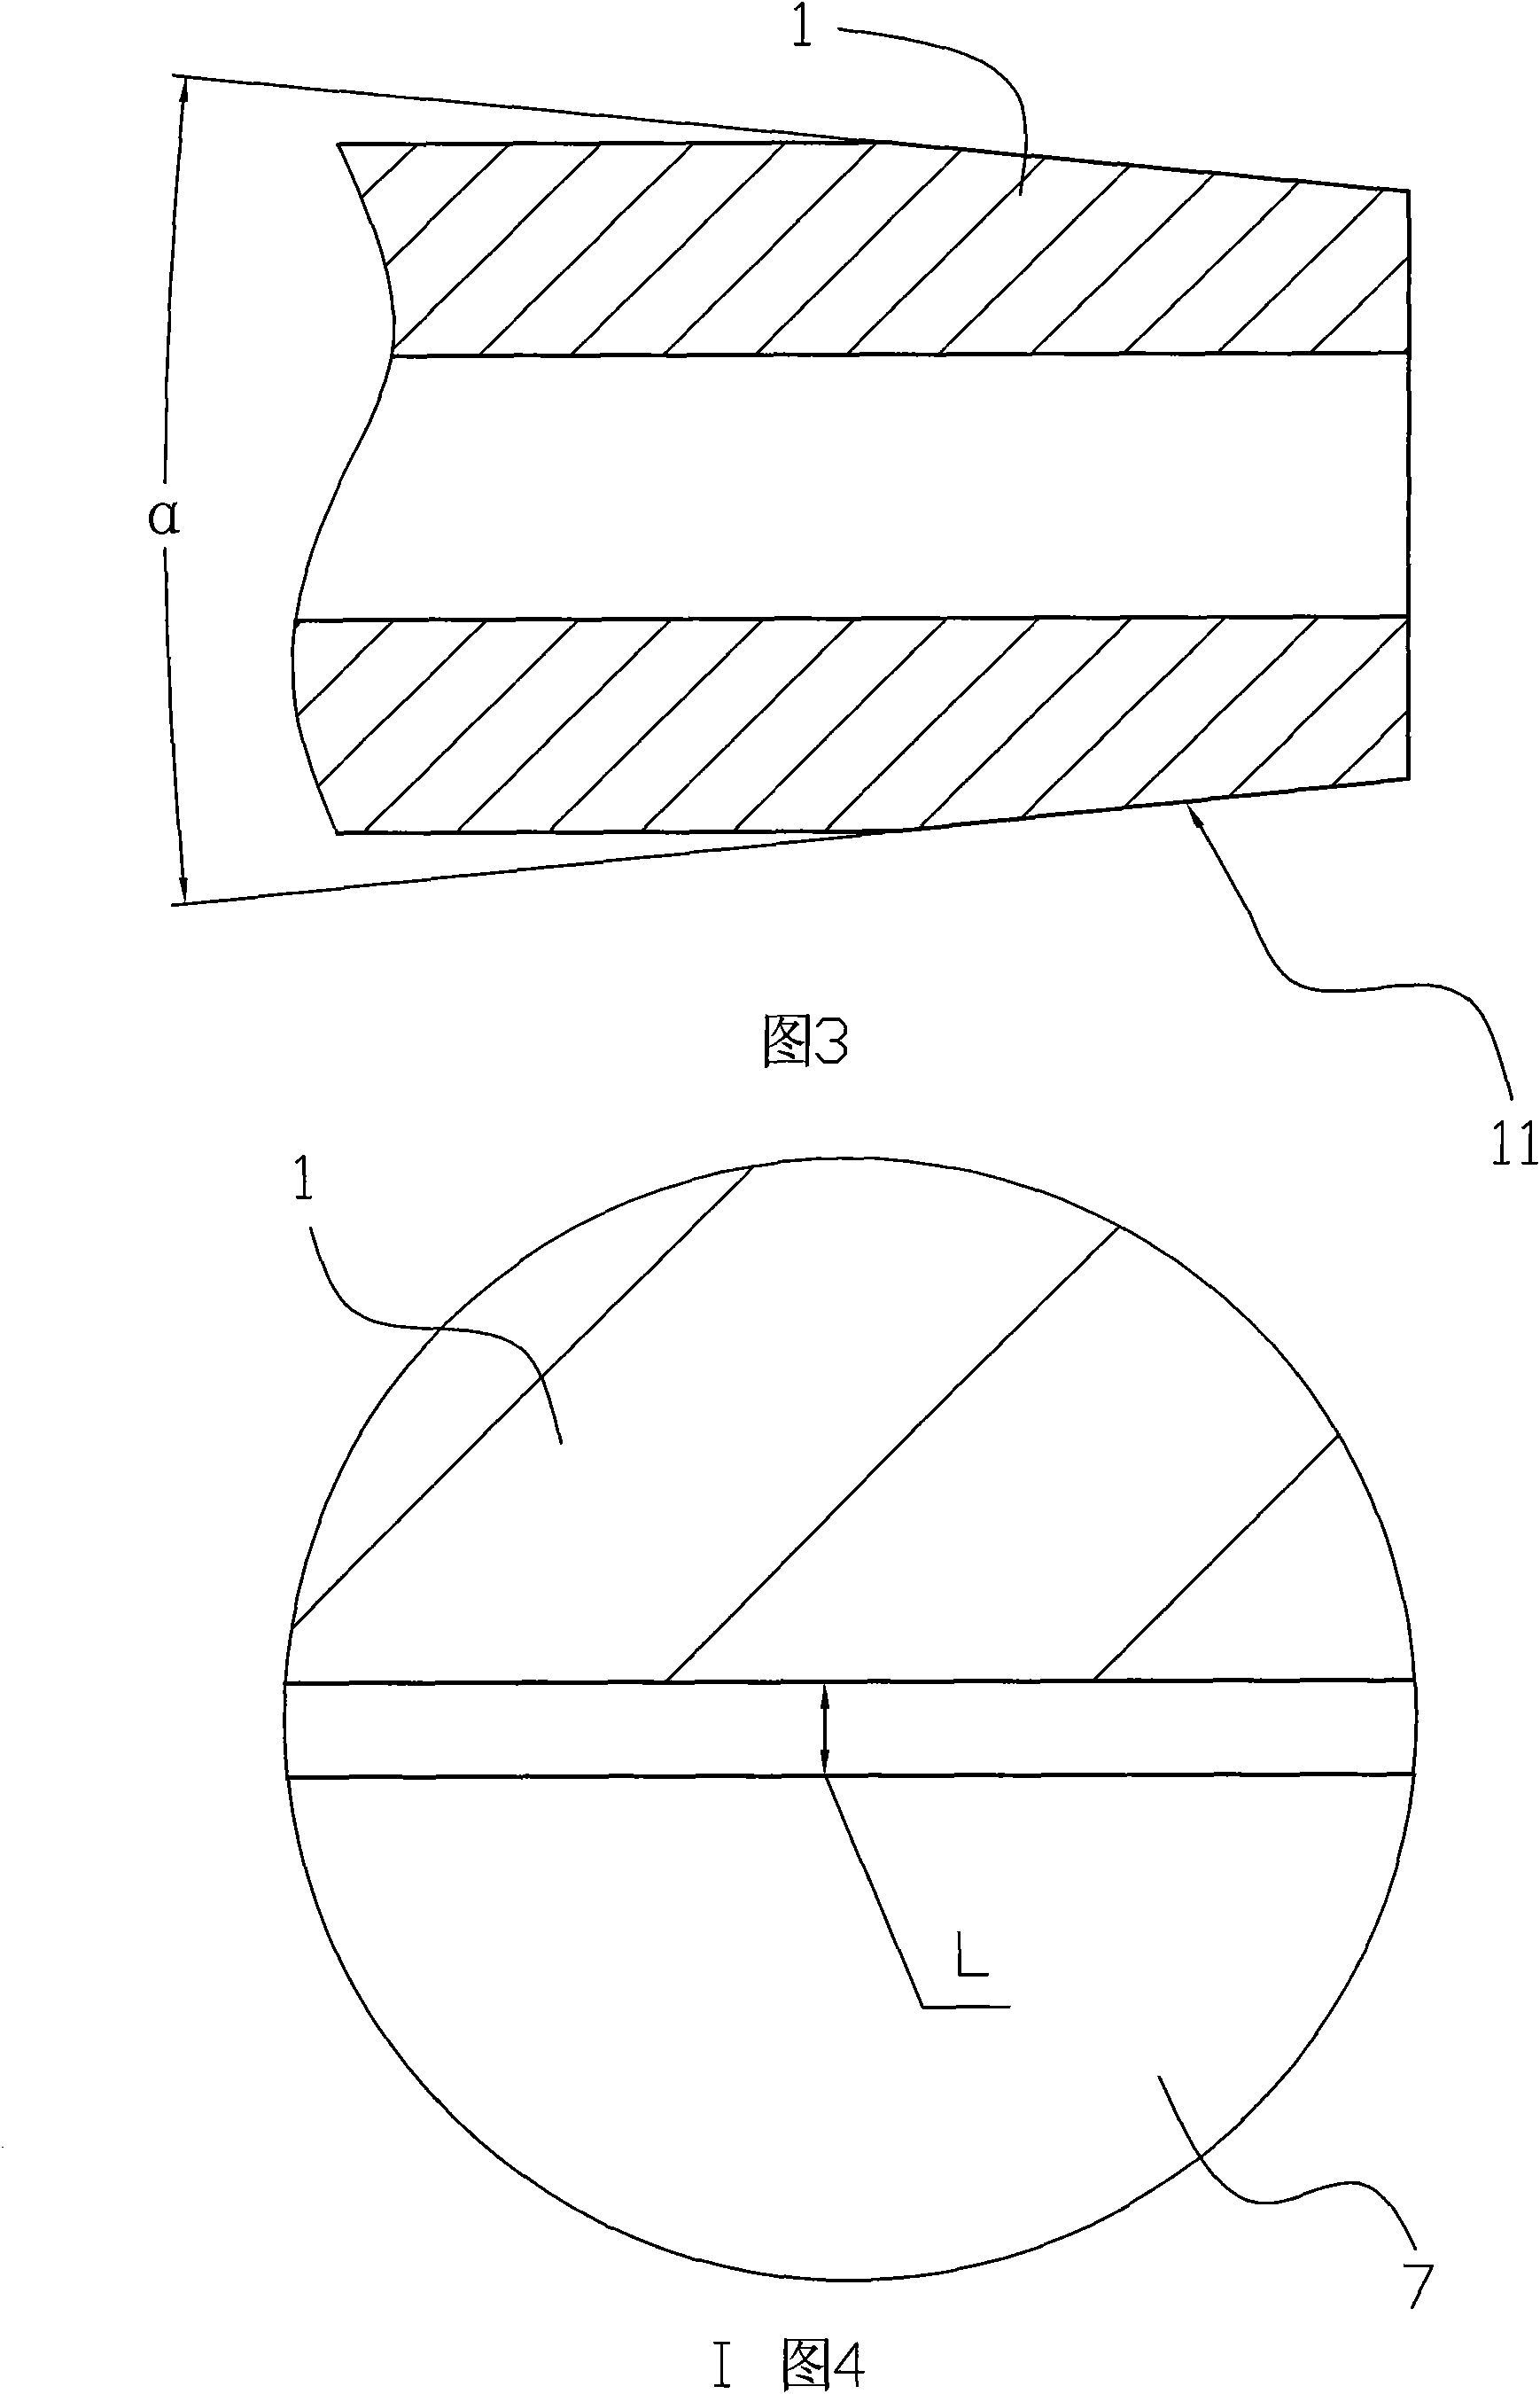 Three-roller planetary rolling method for rolling brass tube